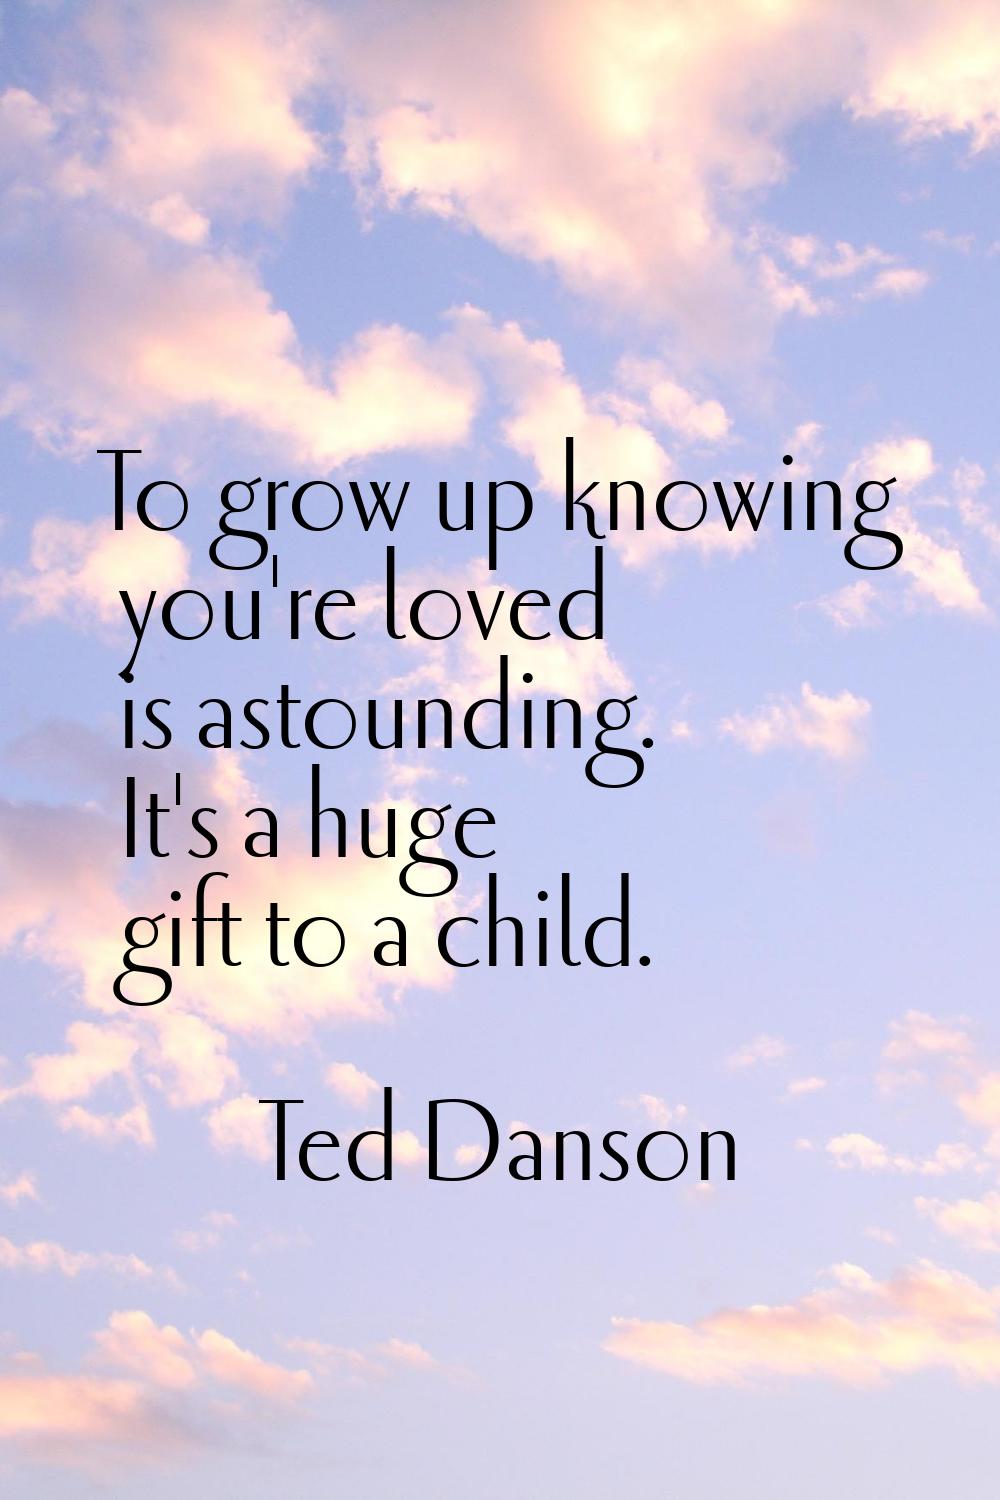 To grow up knowing you're loved is astounding. It's a huge gift to a child.